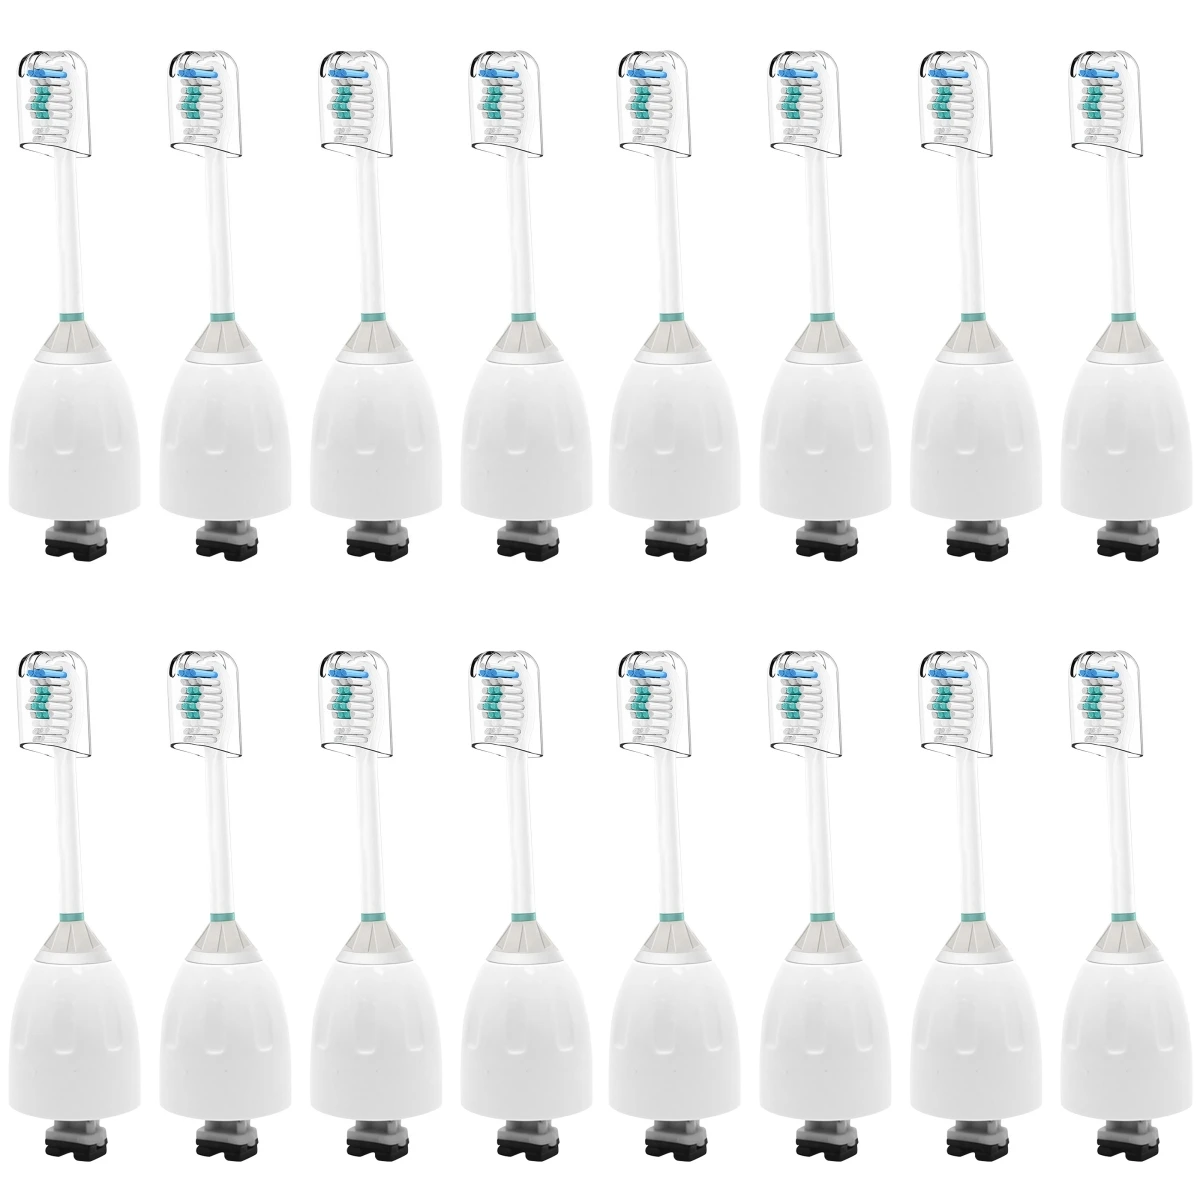 

16x Replacment Brush Heads Compatible with Philips Sonicare E-Series Essence, Xtreme, Elite, Advance, and CleanCare Toothbrushes